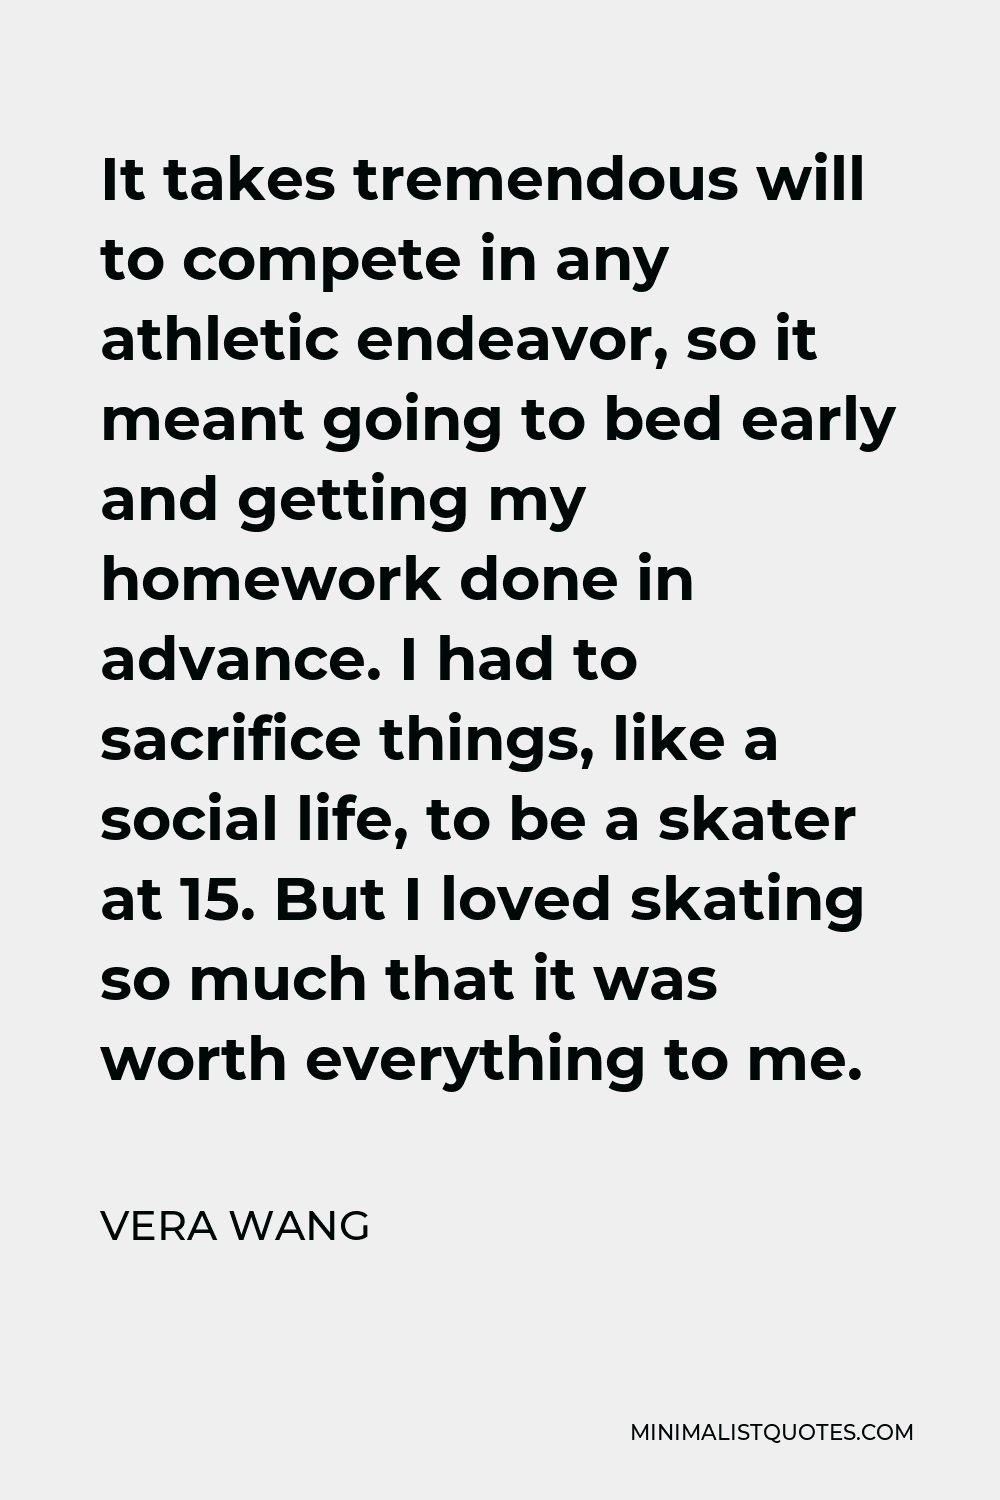 Vera Wang Quote - It takes tremendous will to compete in any athletic endeavor, so it meant going to bed early and getting my homework done in advance. I had to sacrifice things, like a social life, to be a skater at 15. But I loved skating so much that it was worth everything to me.